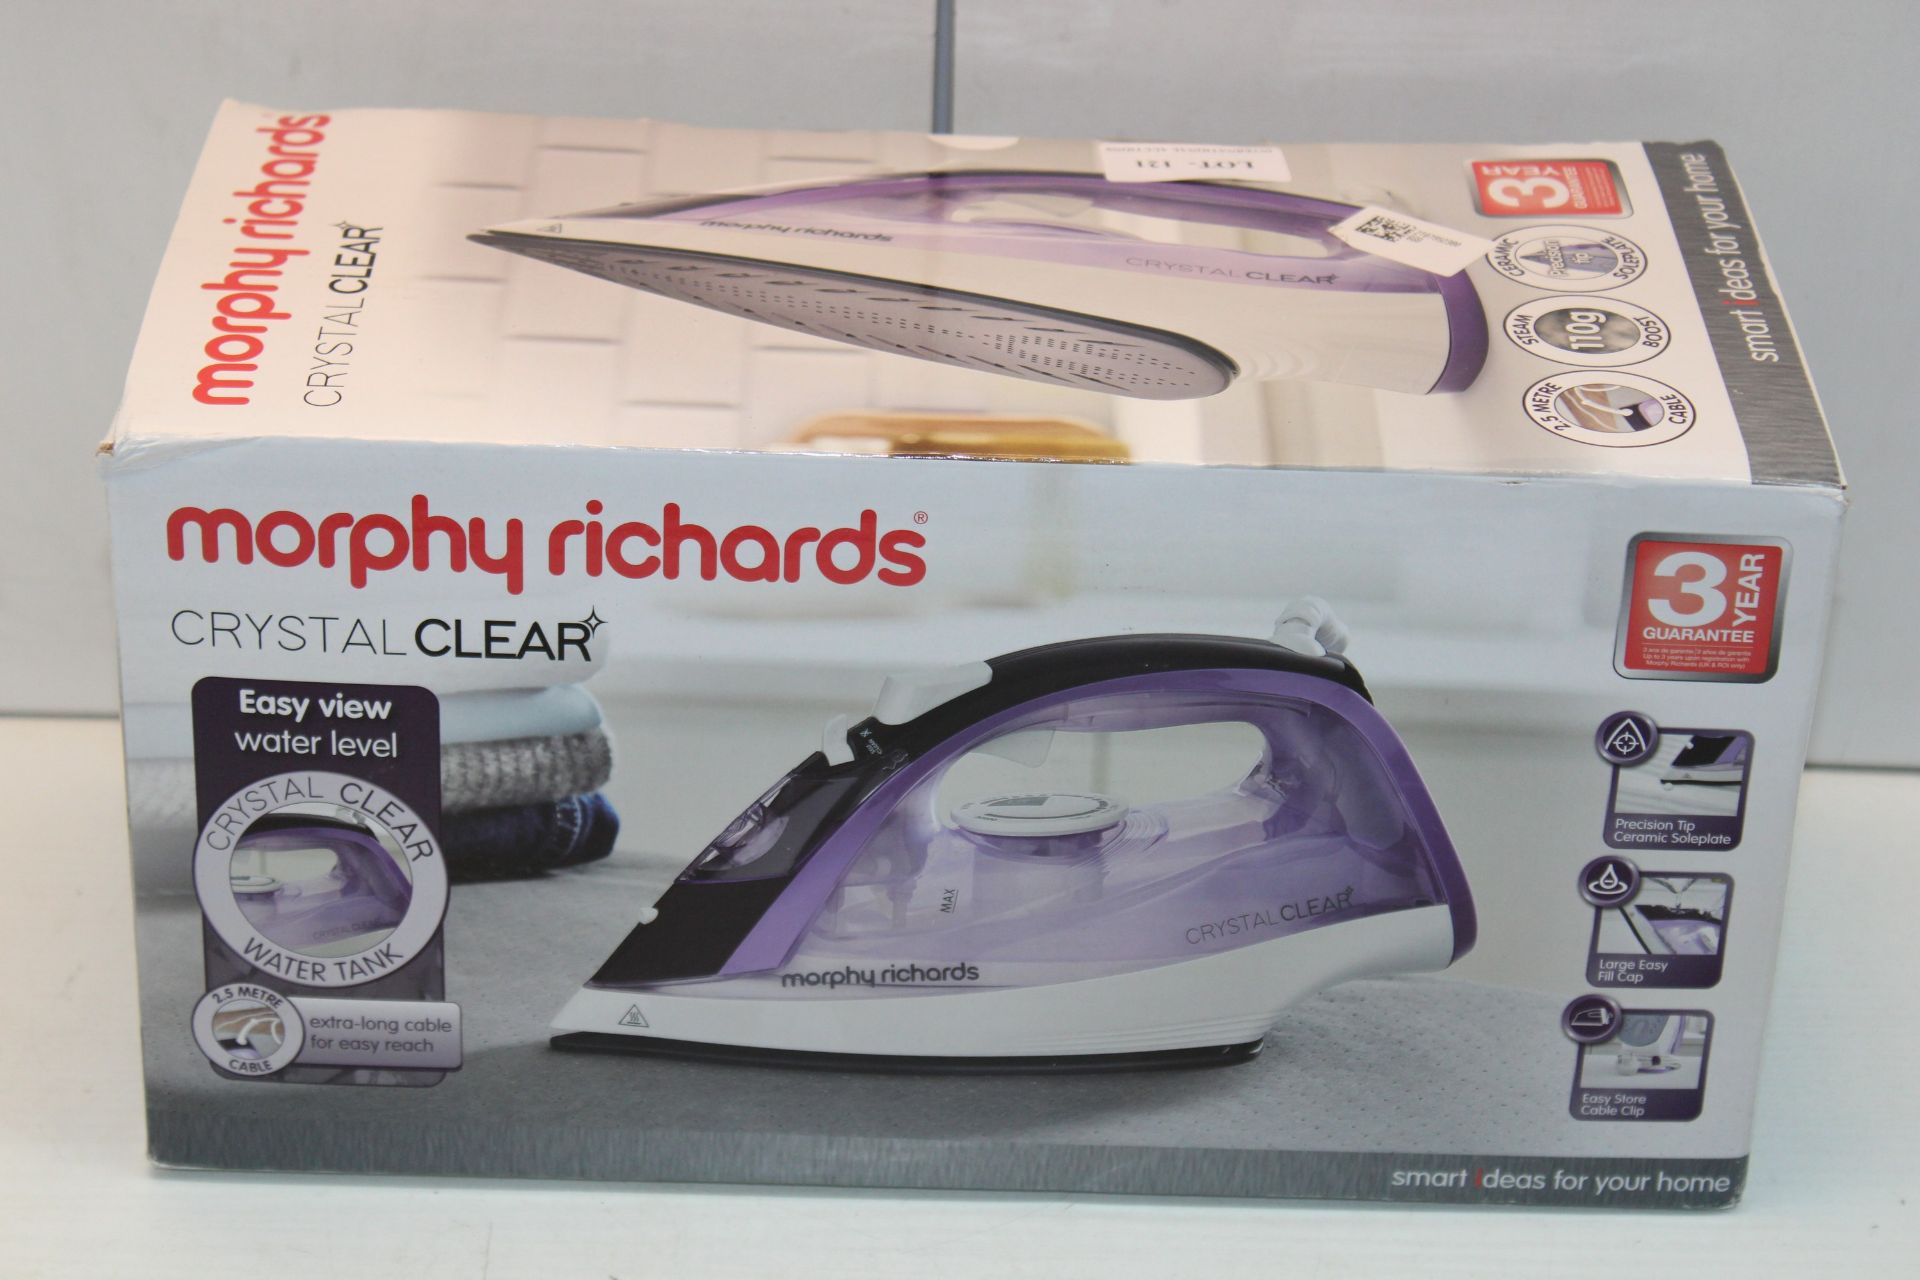 BOXED MORPHY RICHARDS CRYSTAL CLEAR STEAM IRON RRP £24.99Condition ReportAppraisal Available on